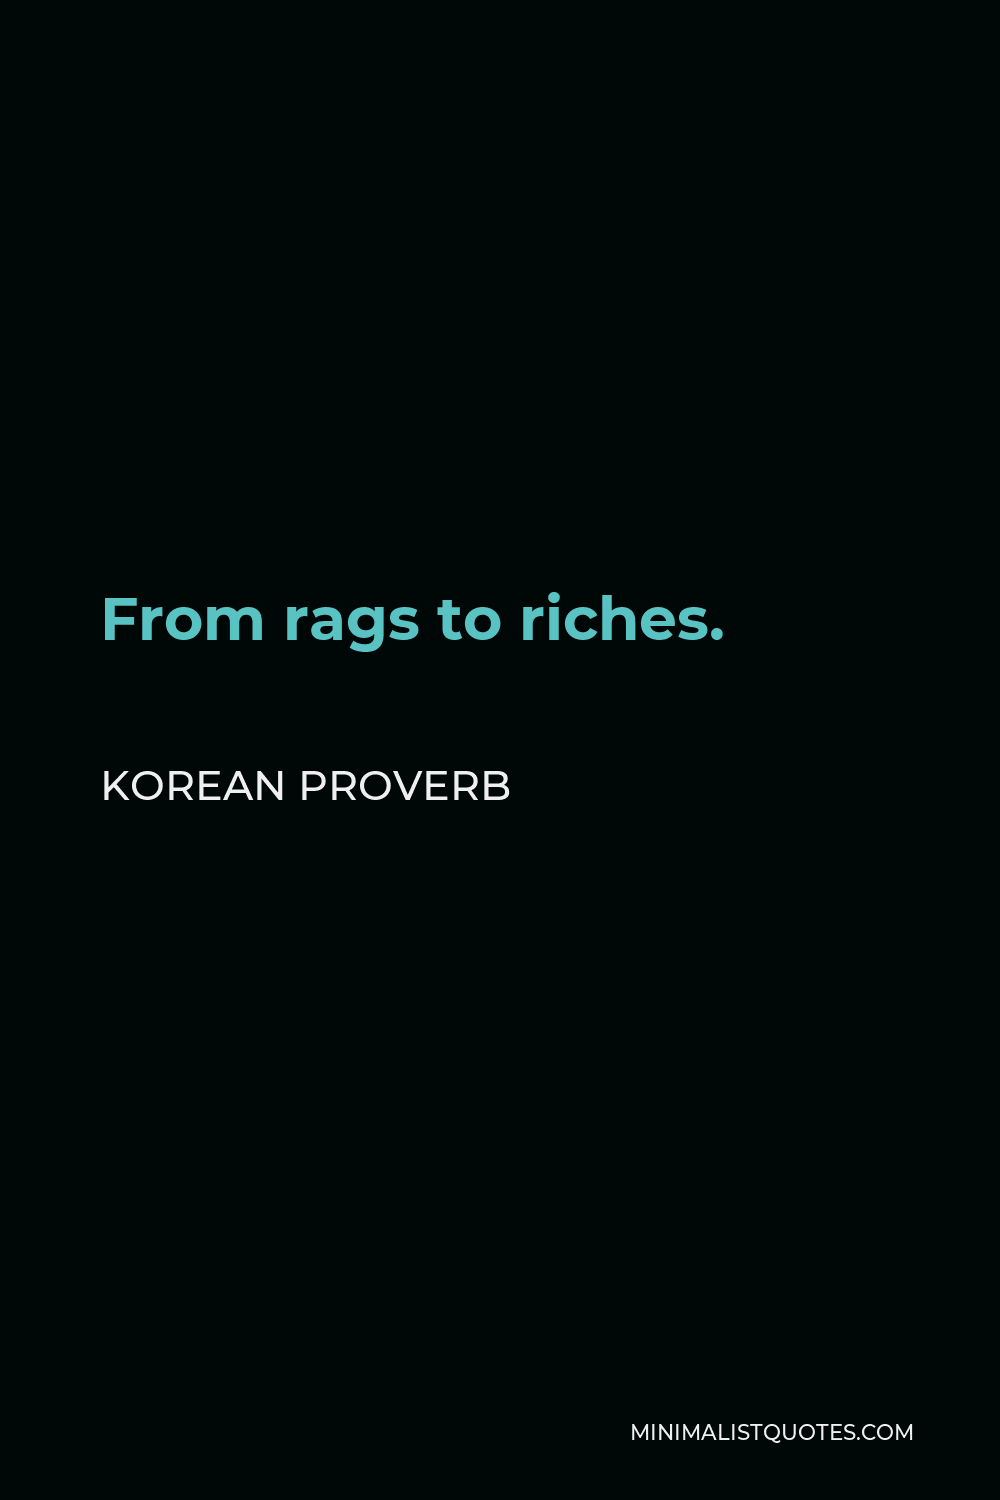 Korean Proverb Quote - From rags to riches.